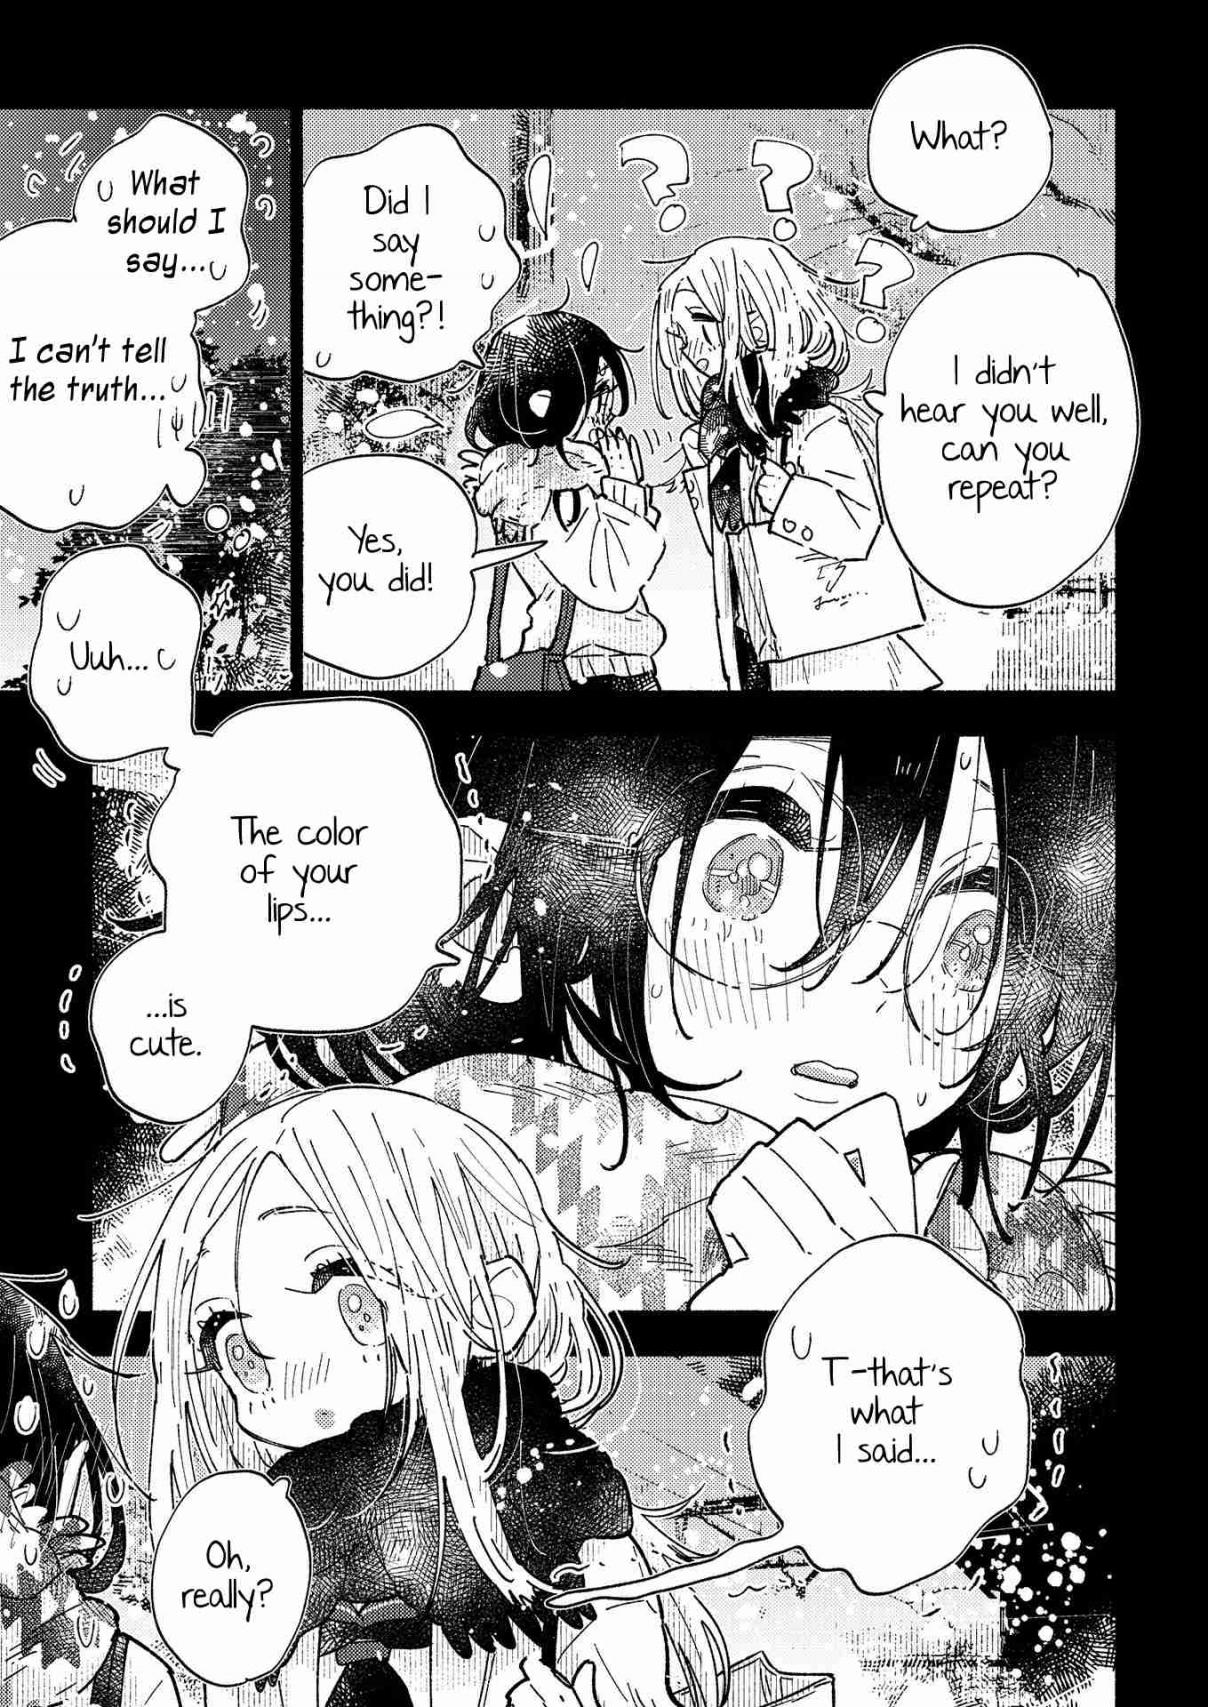 Himegoto ~The Adult Virgin and The Experienced High Schooler ~ Ch. 6 Snow Muse